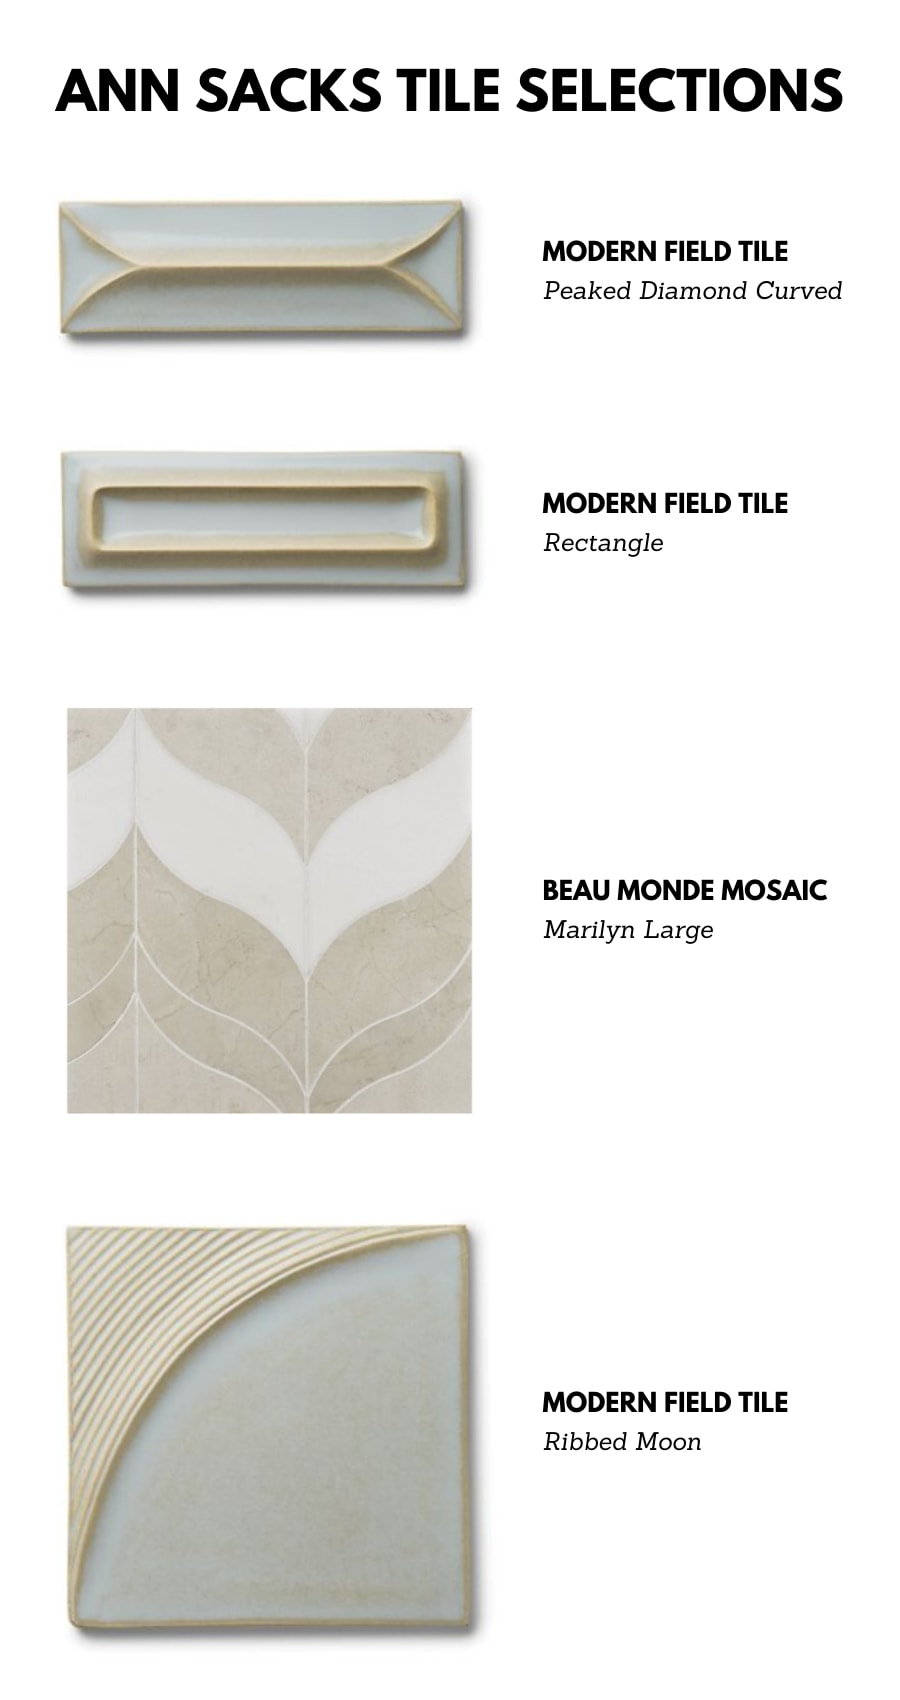 A selection of Ann Sacks tile used in a Houston home designed by Laura U